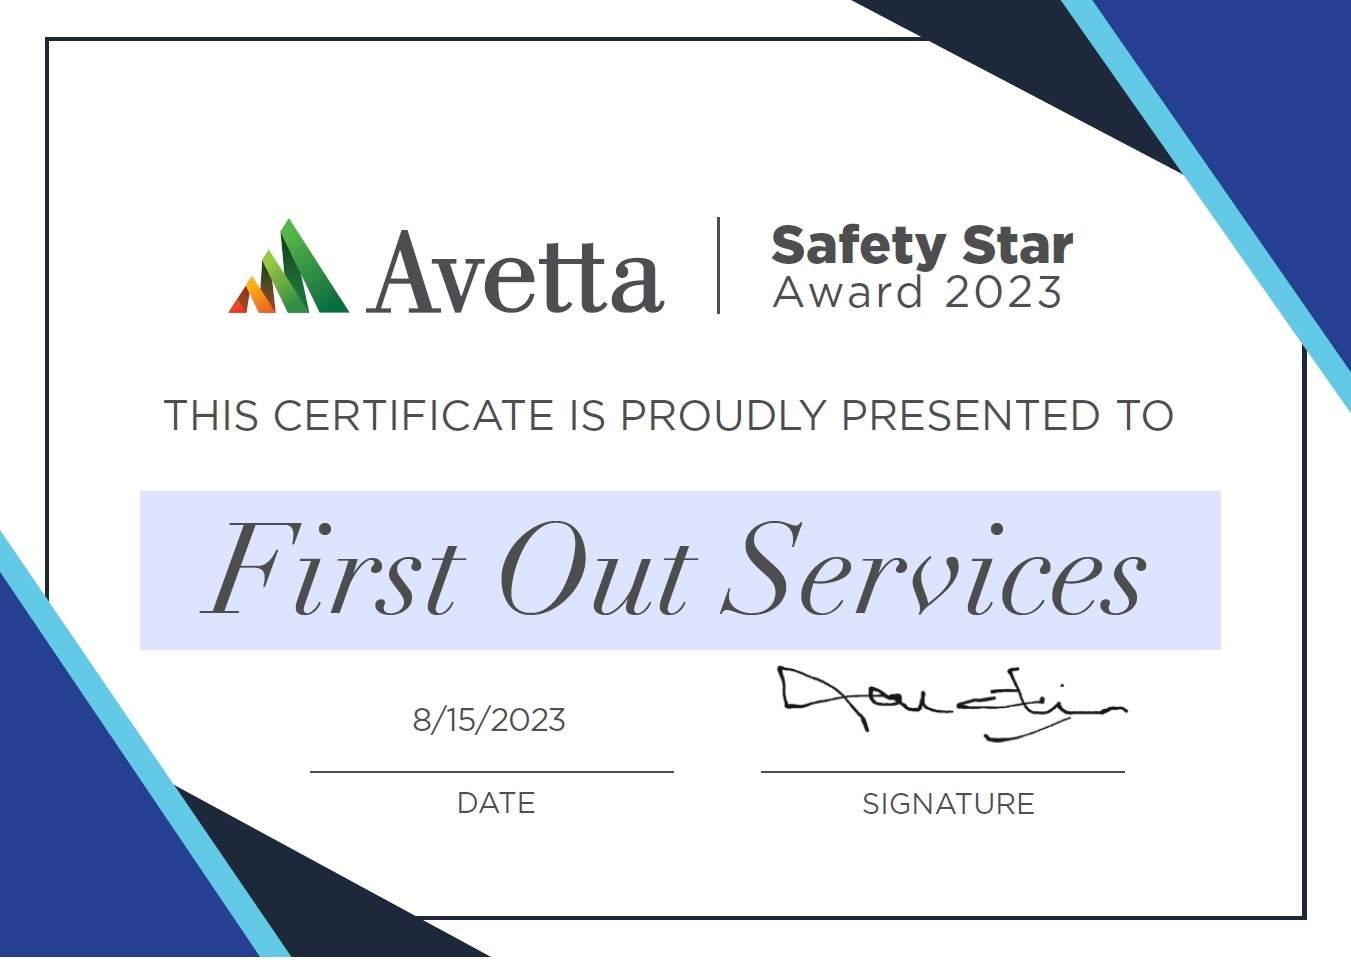 Avetta Safety Star Award 2023 - First Out Services